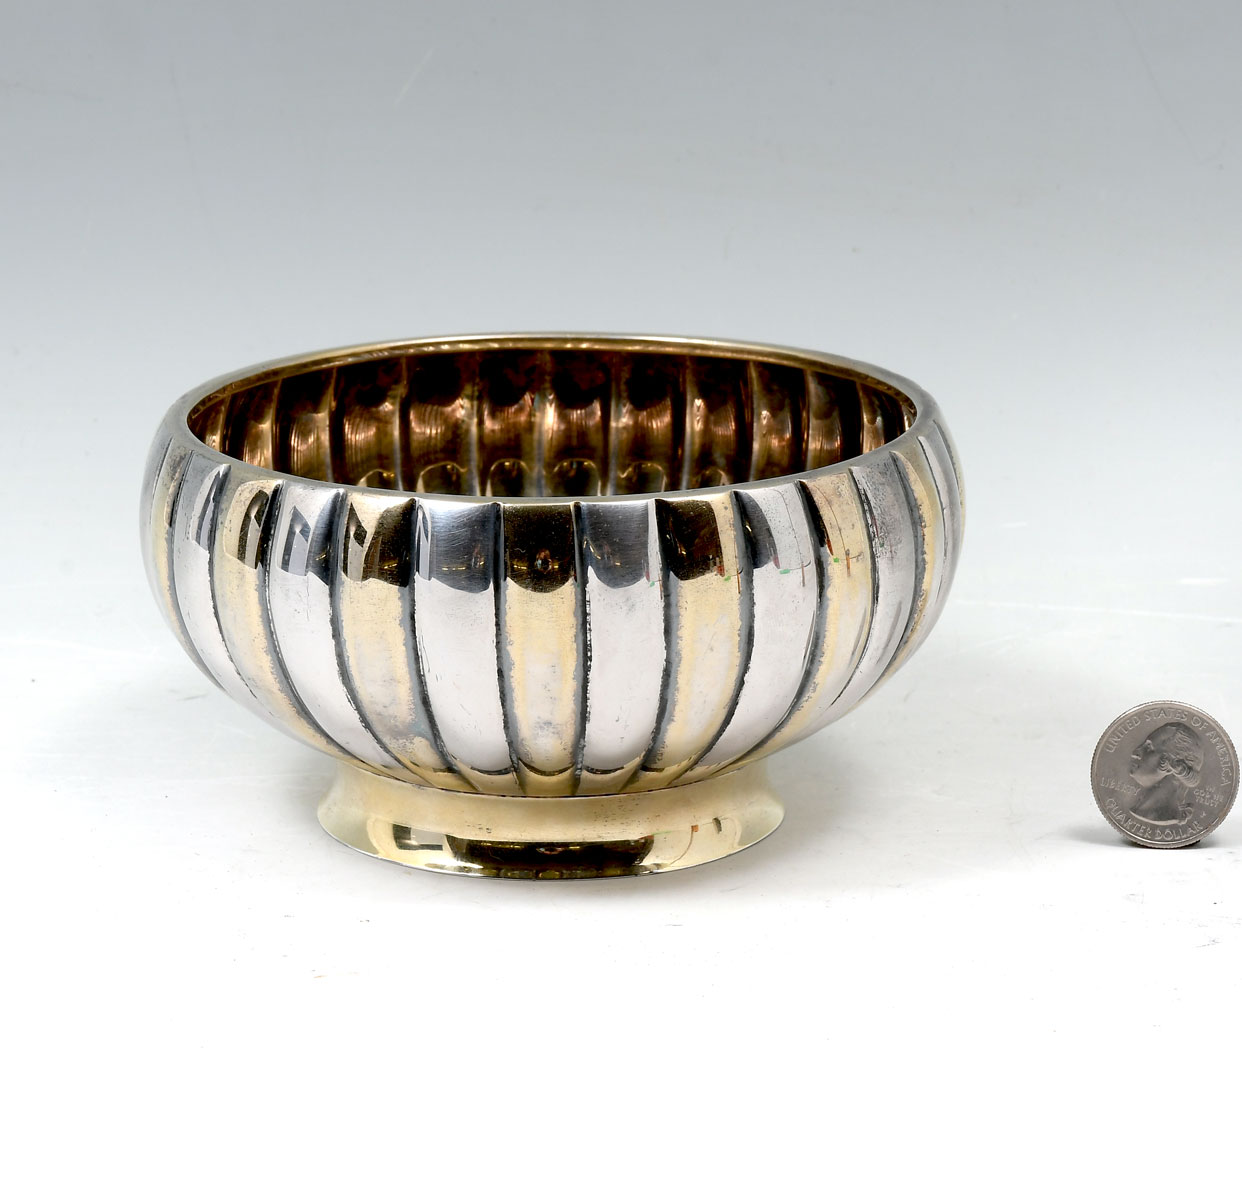 MEXICAN STERLING SILVER NUT DISH: